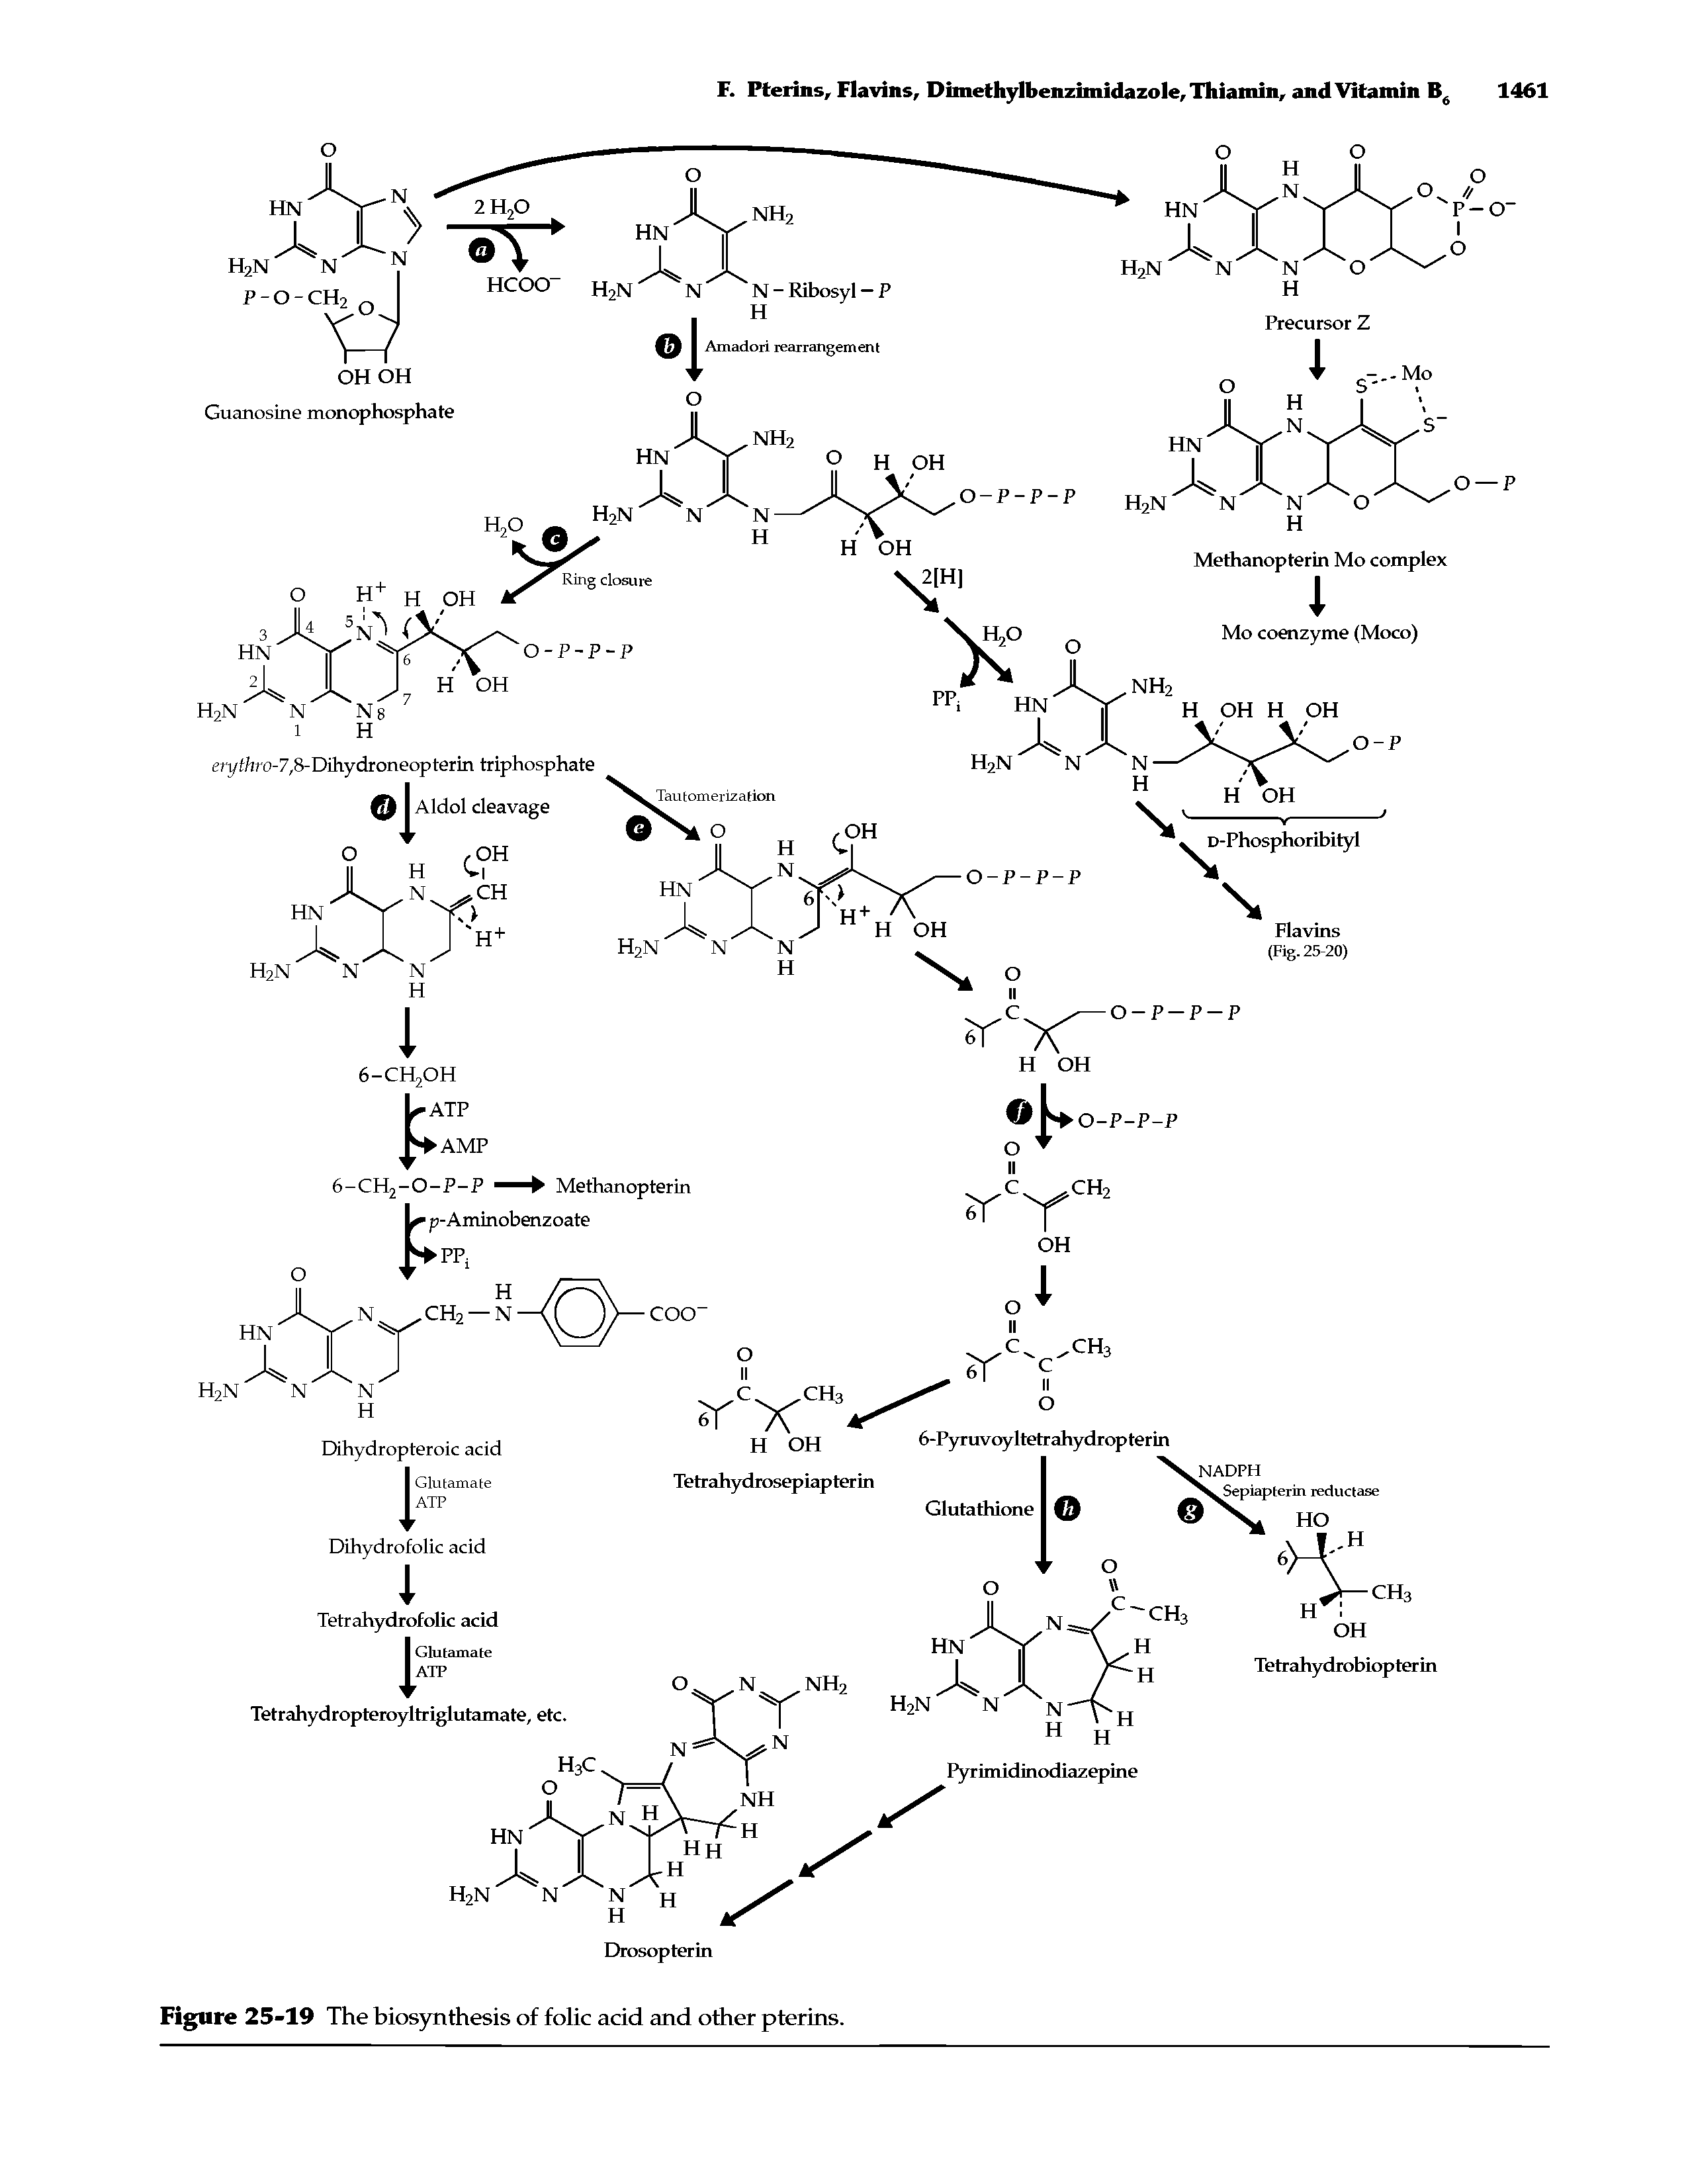 Figure 25-19 The biosynthesis of folic acid and other pterins.